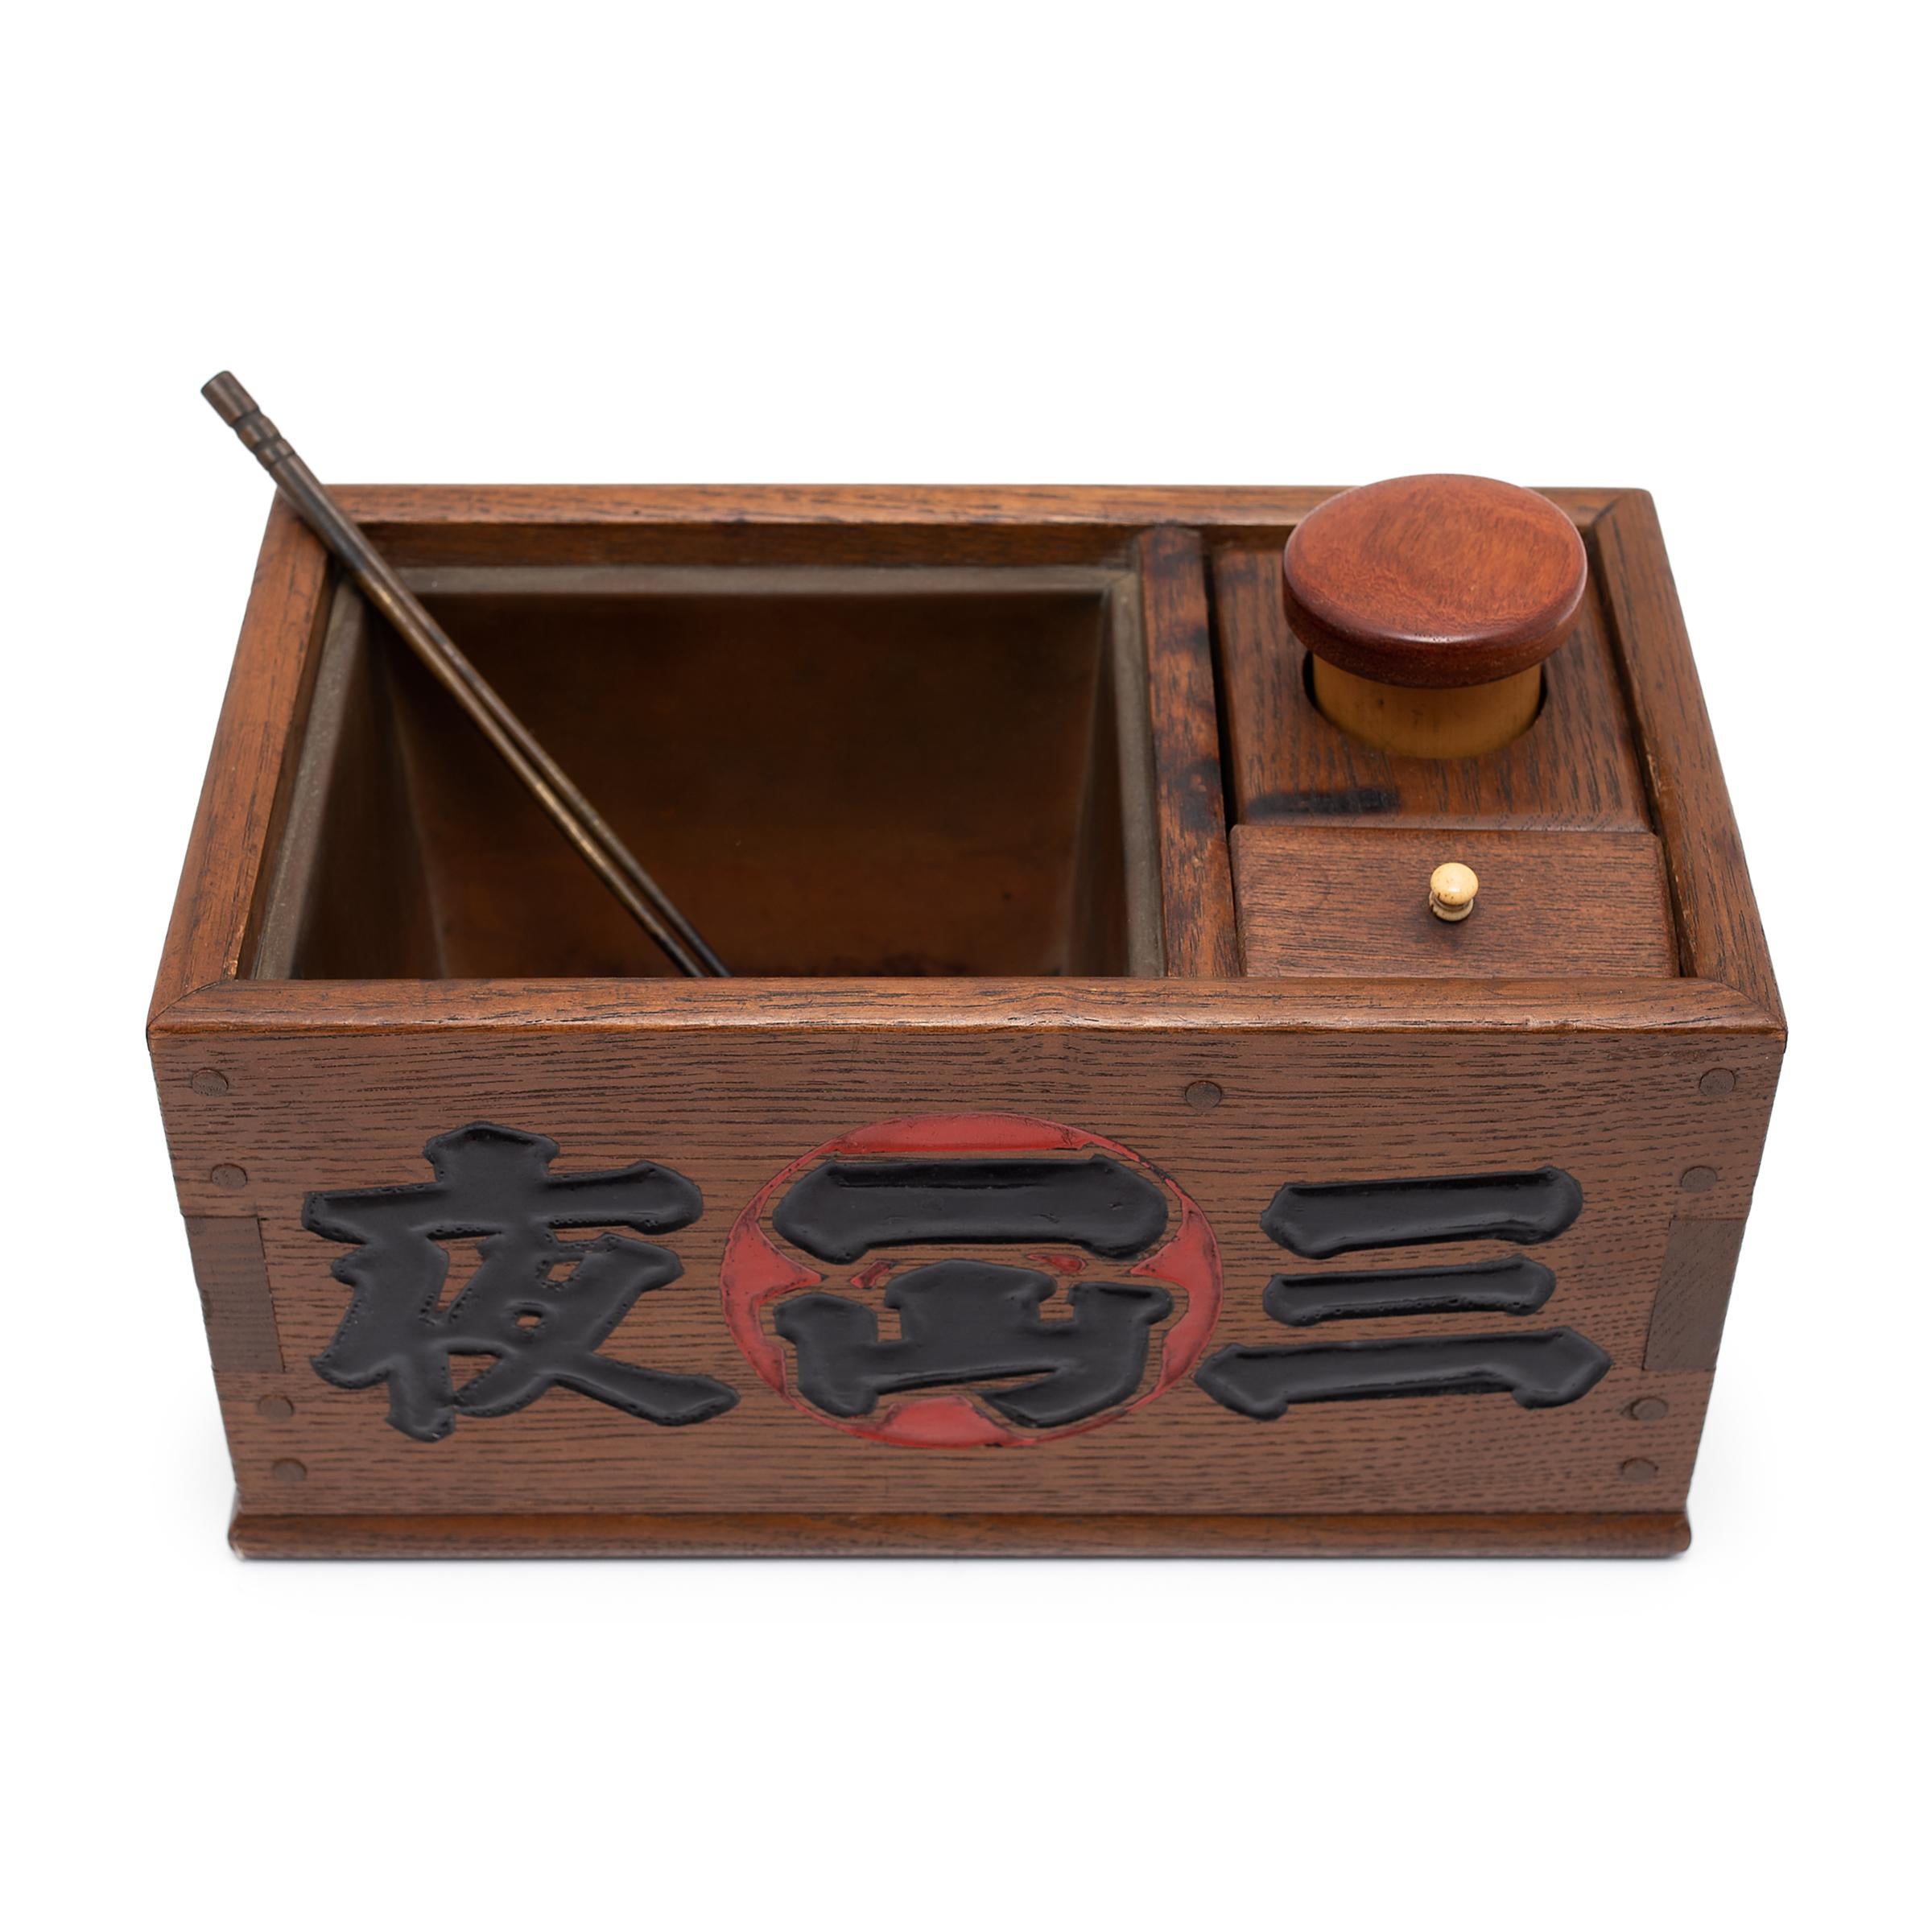 This wooden box is a Japanese tabako-bon, or 'tobacco tray,' used to store tobacco and smoking accessories. Believed to have evolved from the traditional accessories of Japanese incense ceremony, tabako-bons first came into use in the 17th century